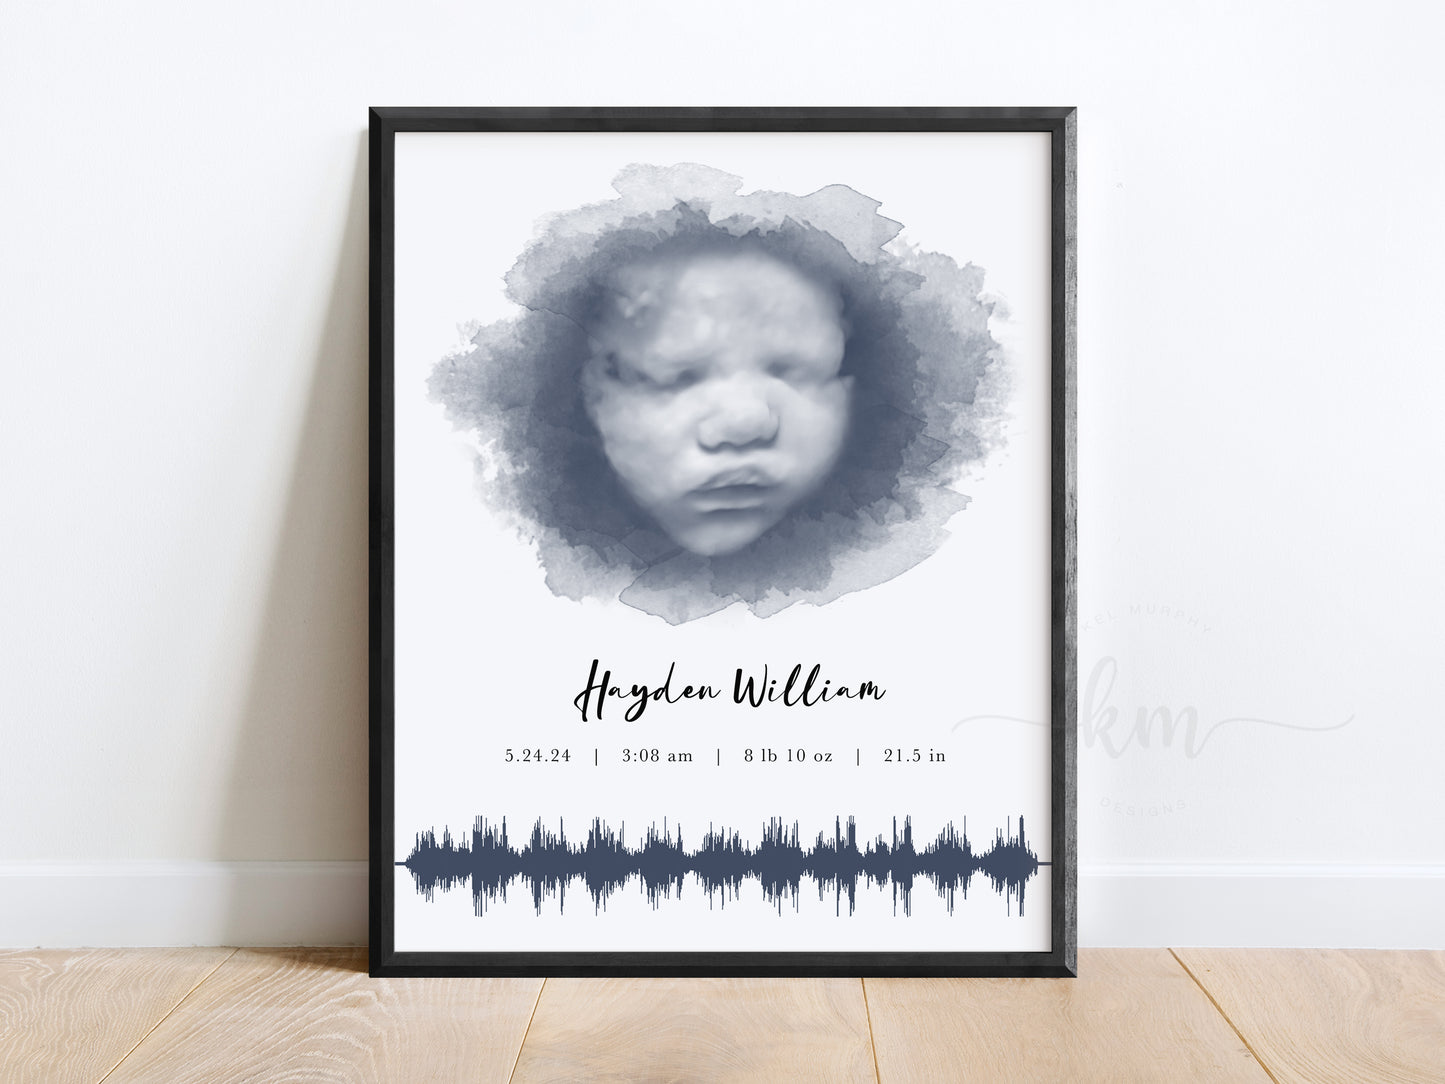 Oval Watercolor 3D Ultrasound Art with Baby Heartbeat